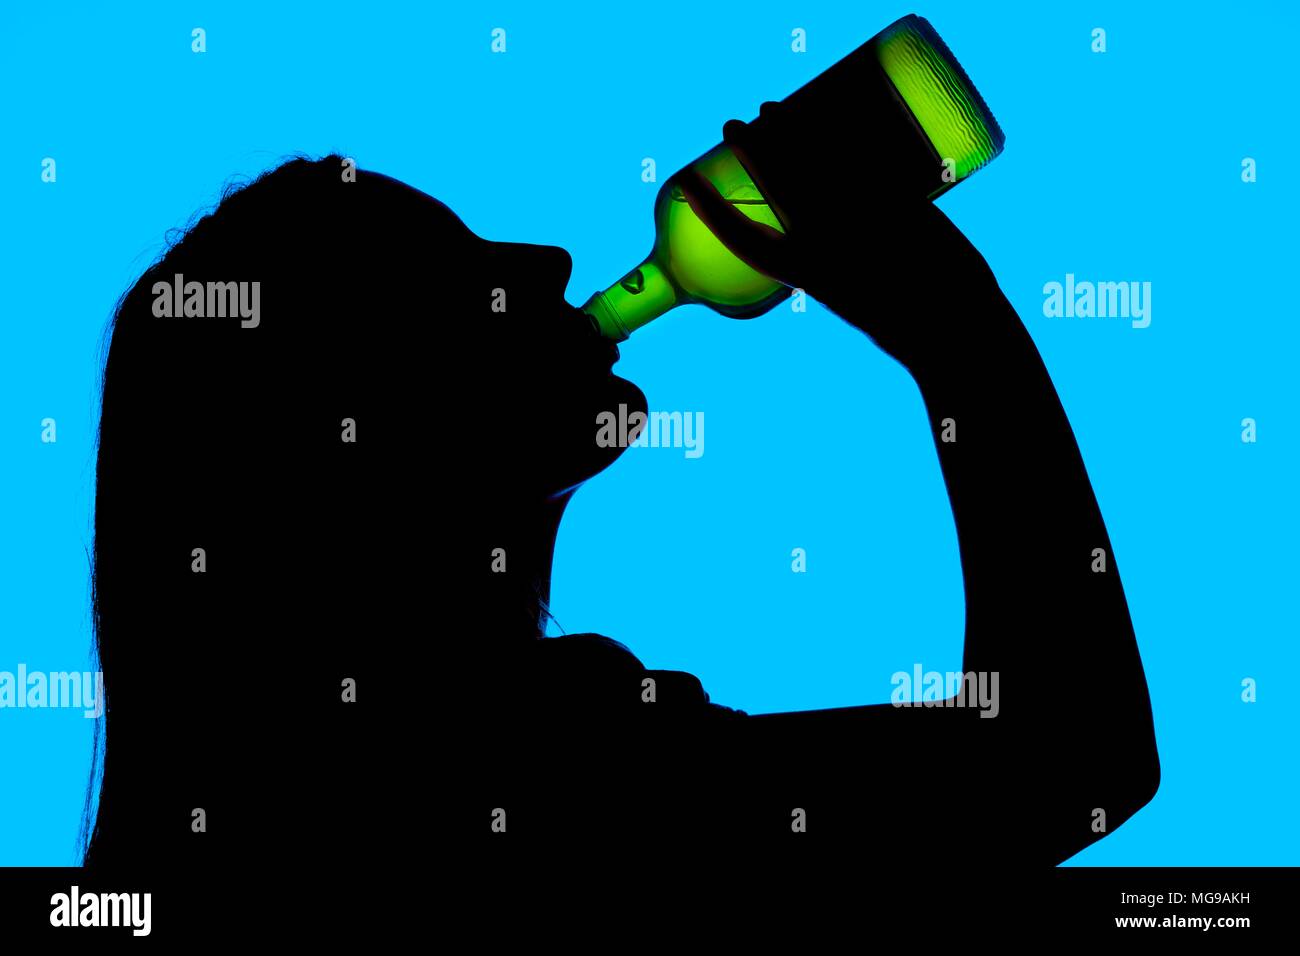 Woman drinking straight from bottle, silhouette. Stock Photo